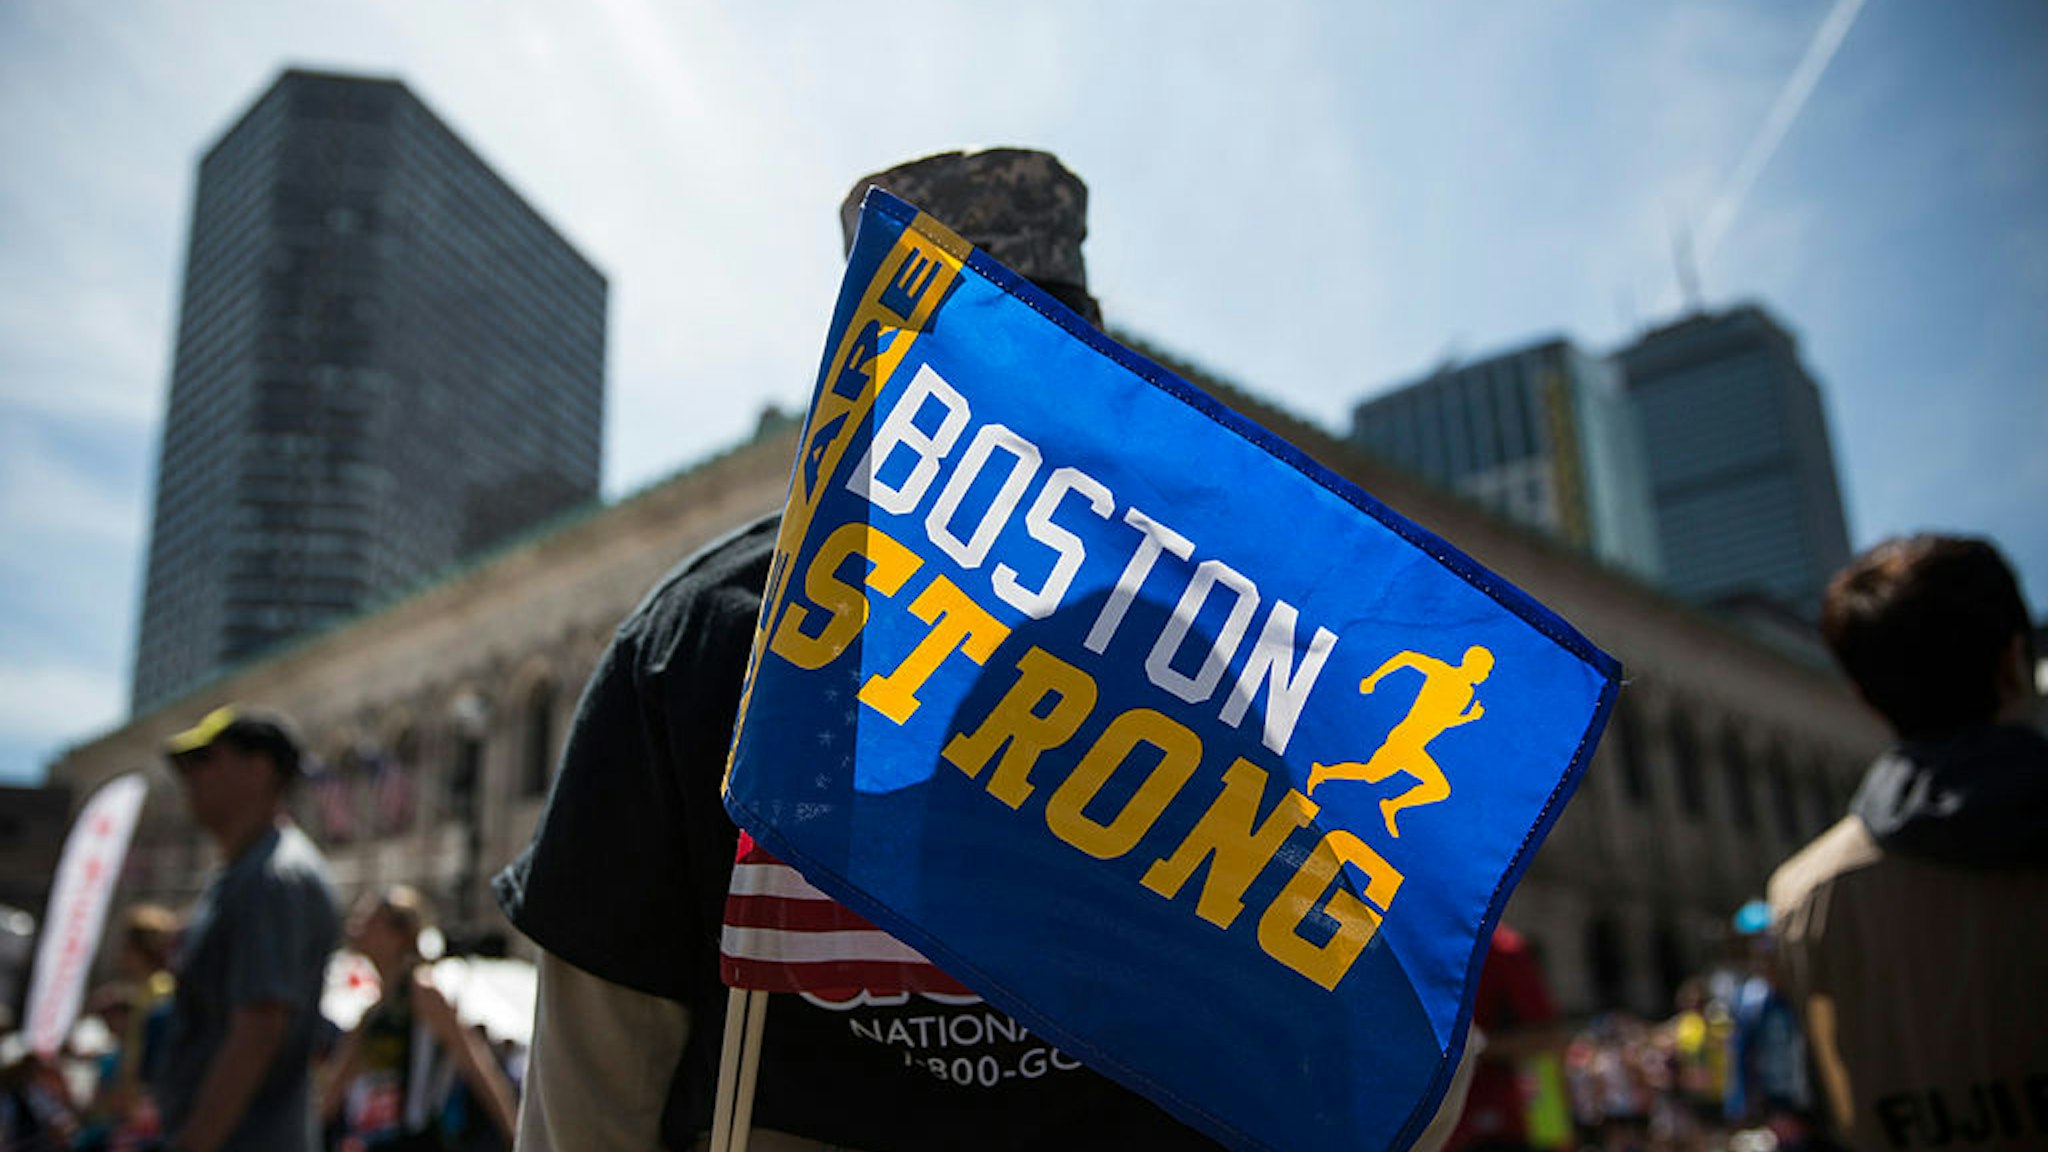 A soldier in the National Guard with a "Boston Strong" flag cheers on runners as they finish the Boston Marathon on April 21, 2014 in Boston, Massachusetts.